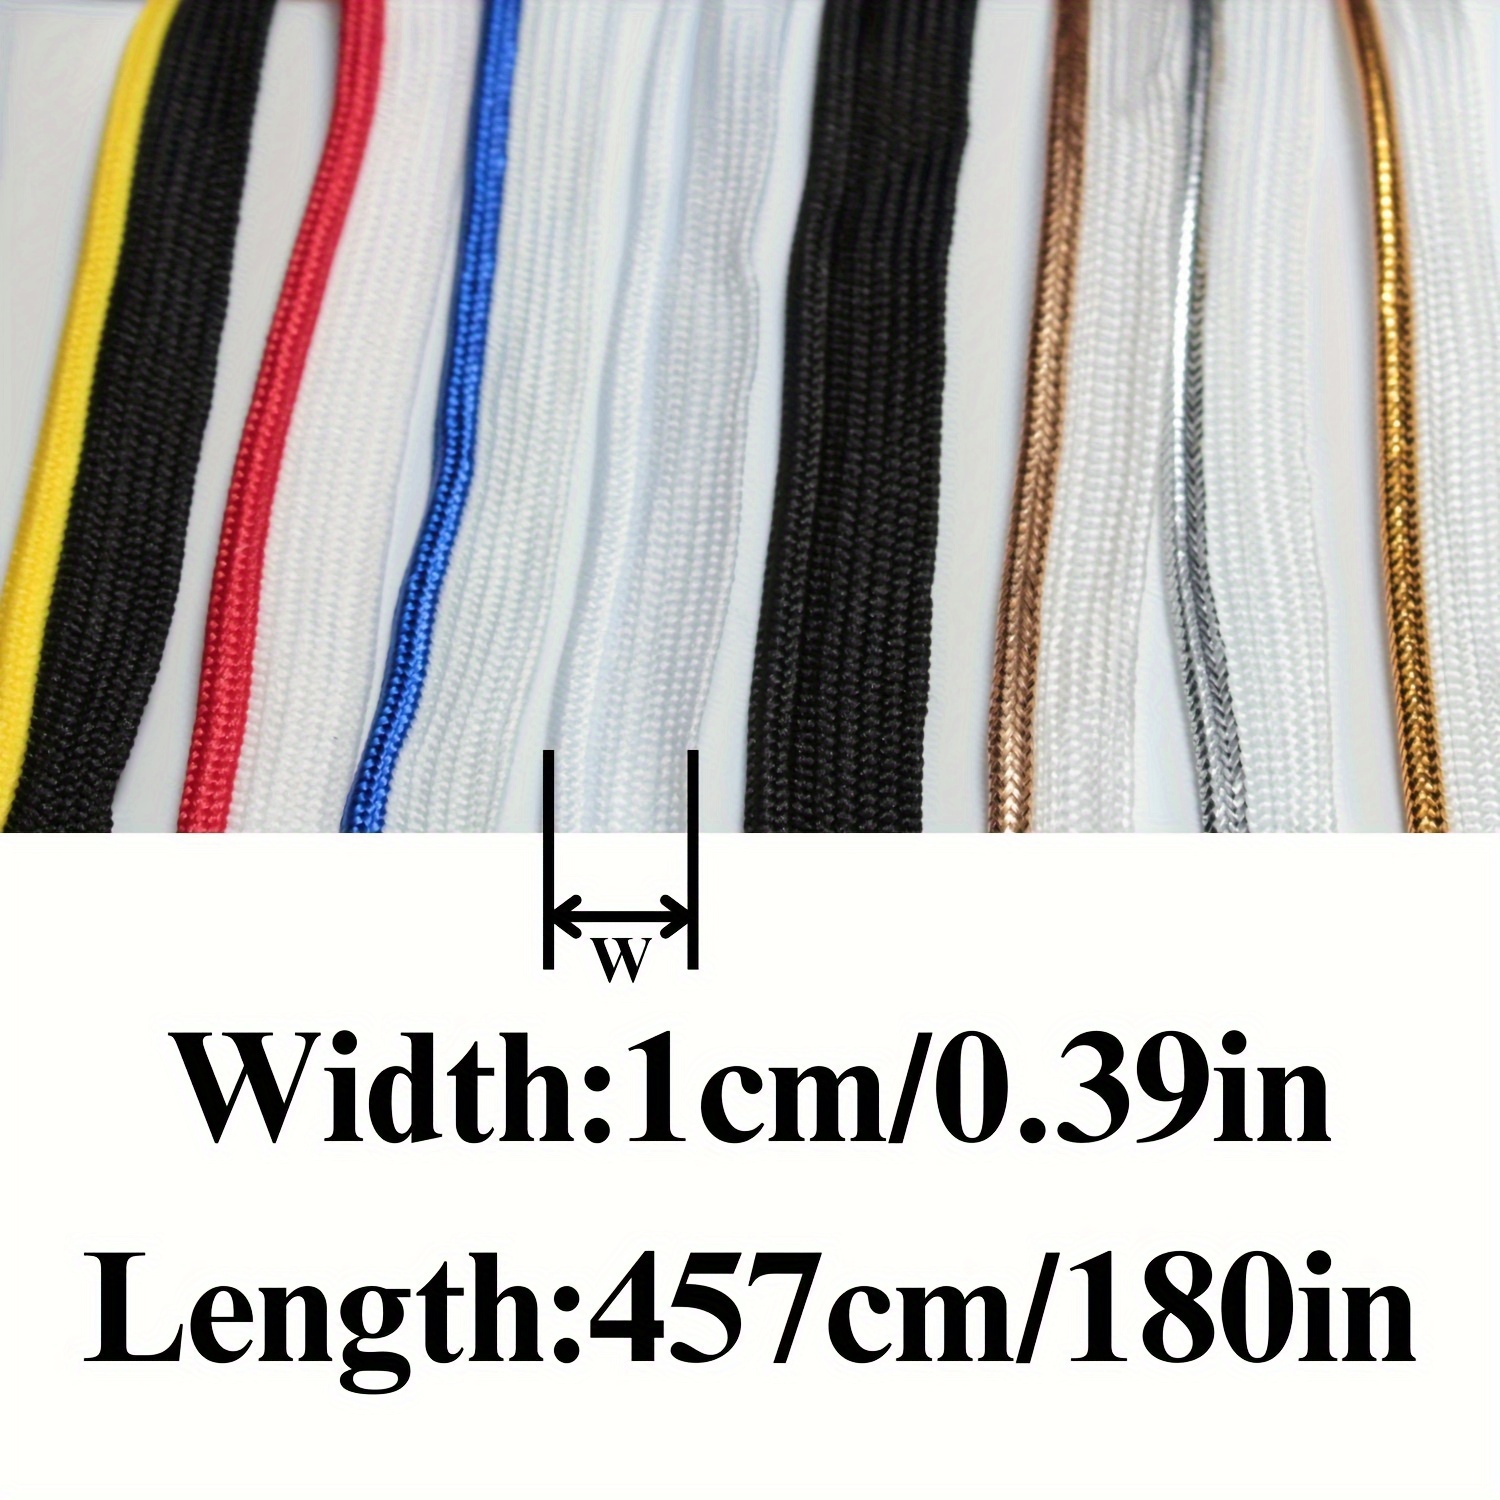 VELVET PIPING CORD 5 MM - Textra